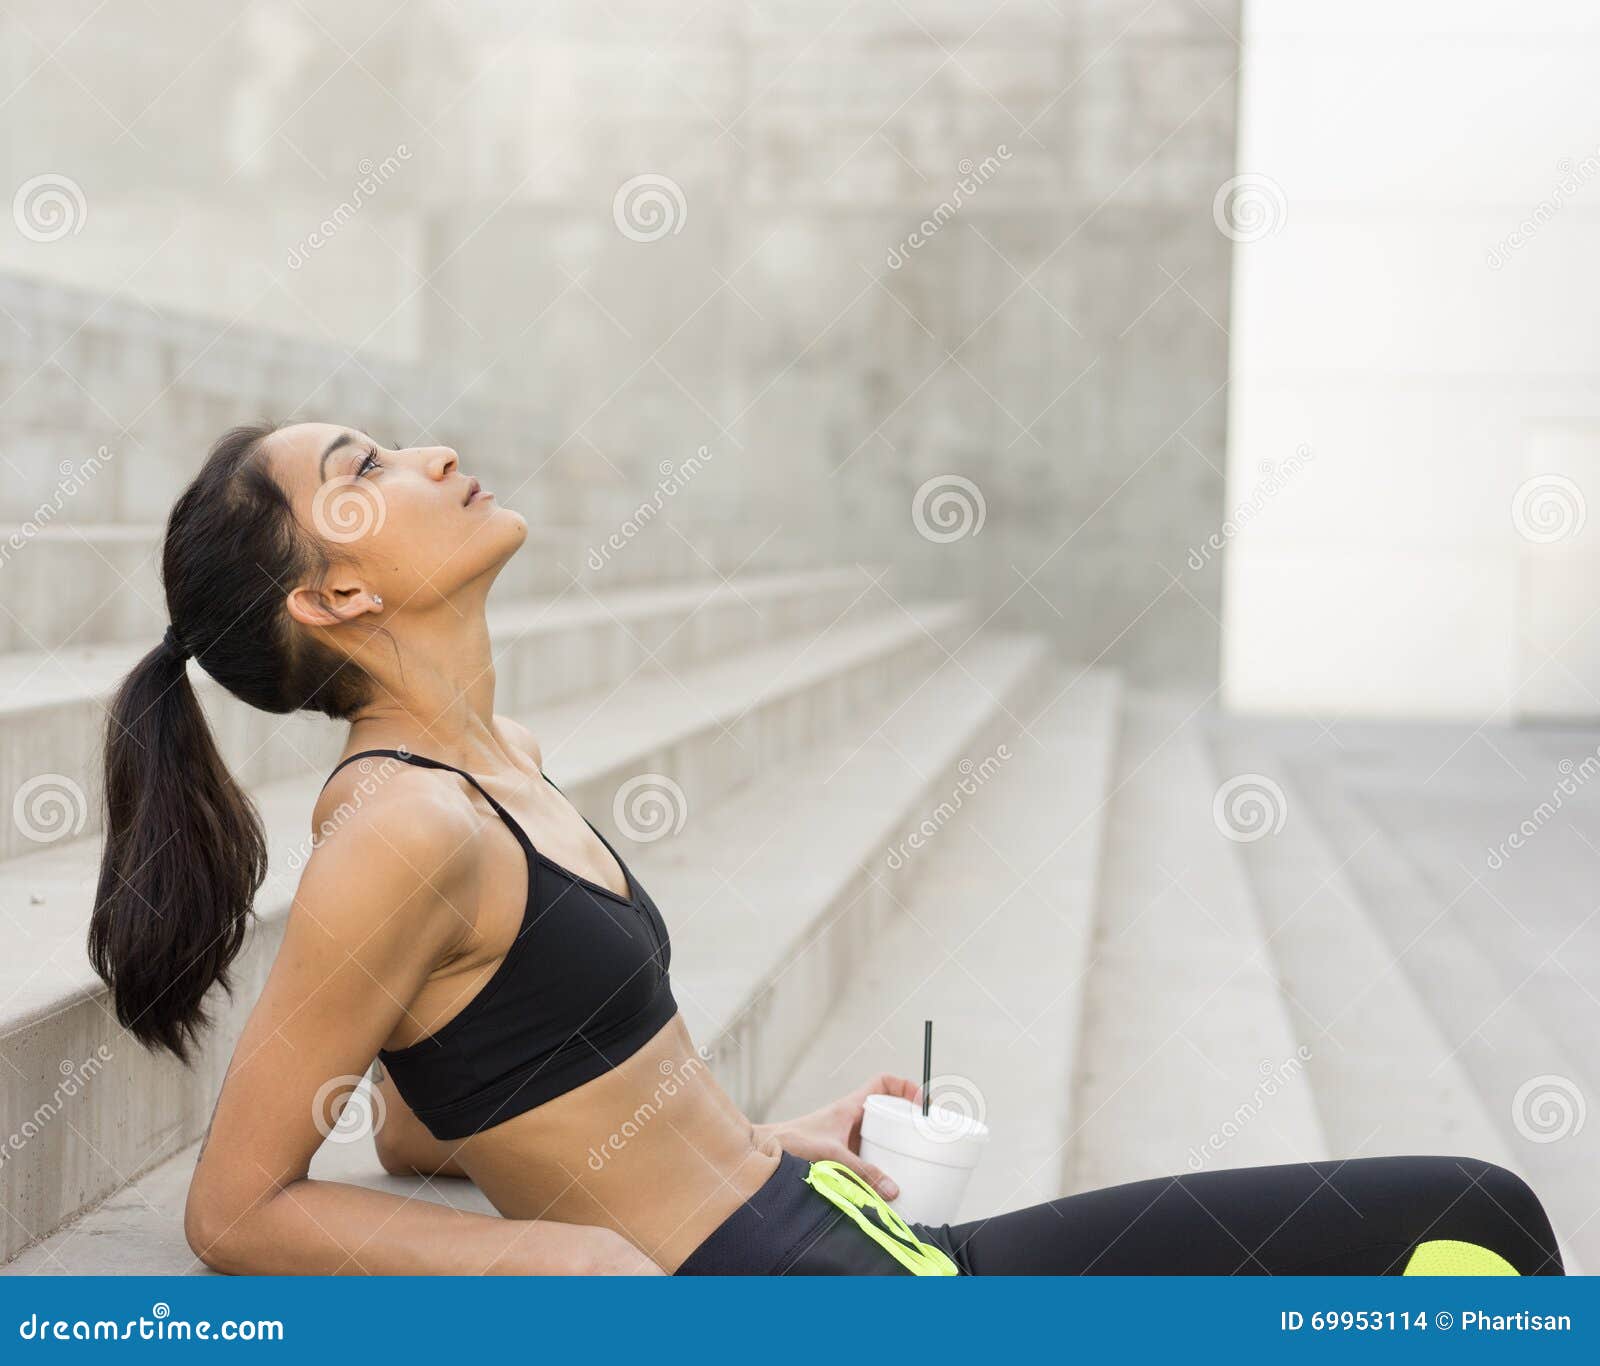 woman recovering from workout